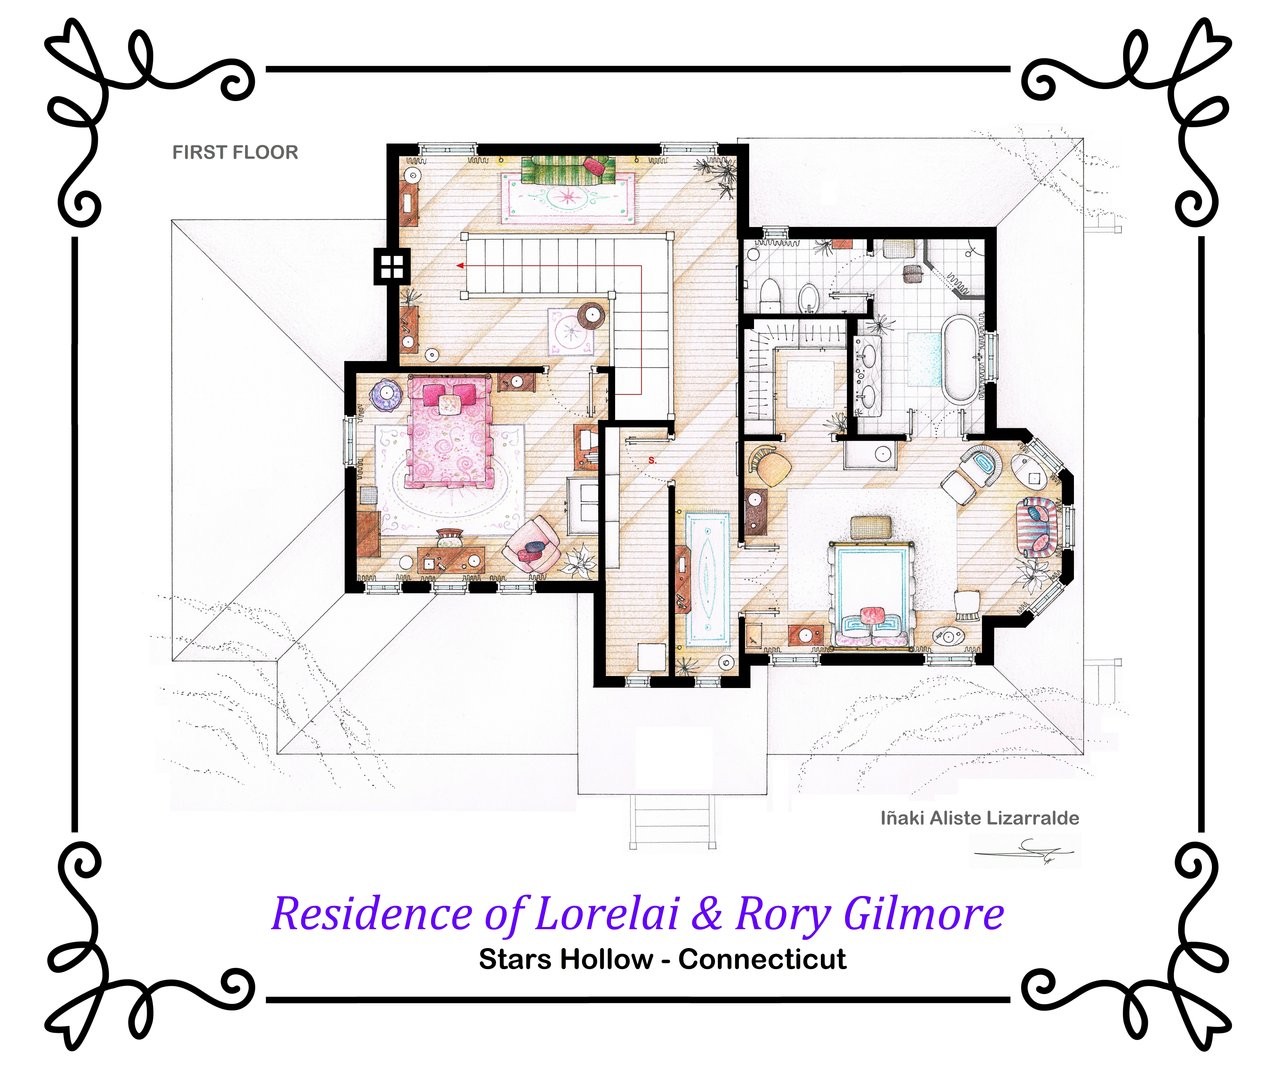 house_of_lorelai_and_rory_gilmore___first_floor_by_nikneuk-d5to1zm.jpg